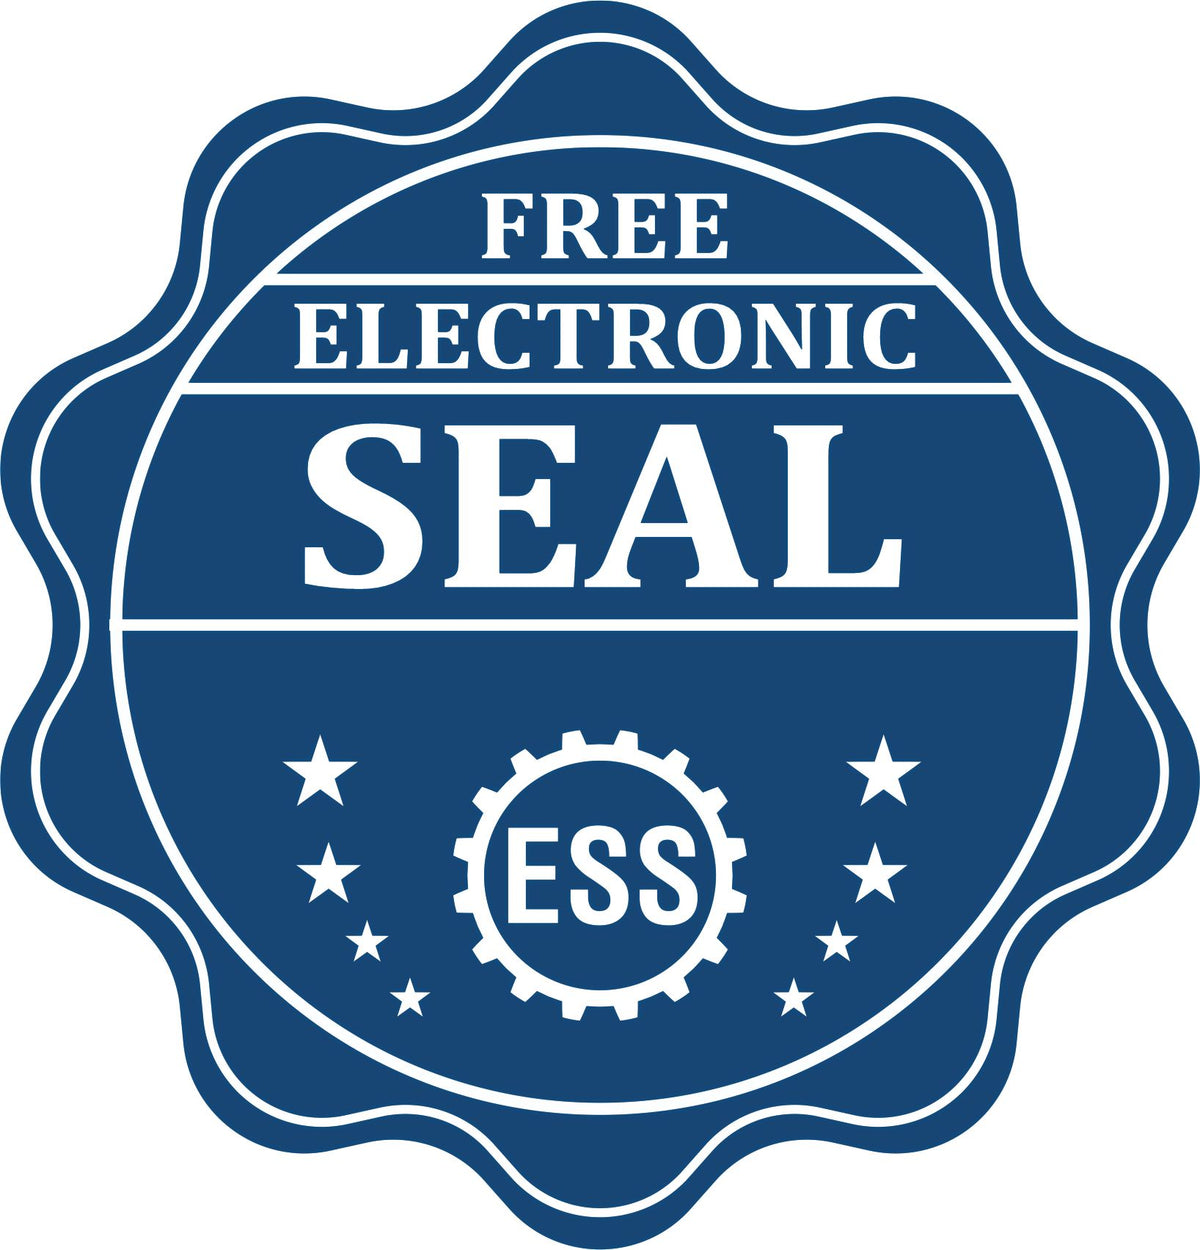 A badge showing a free electronic seal for the Handheld New Jersey Professional Engineer Embosser with stars and the ESS gear on the emblem.